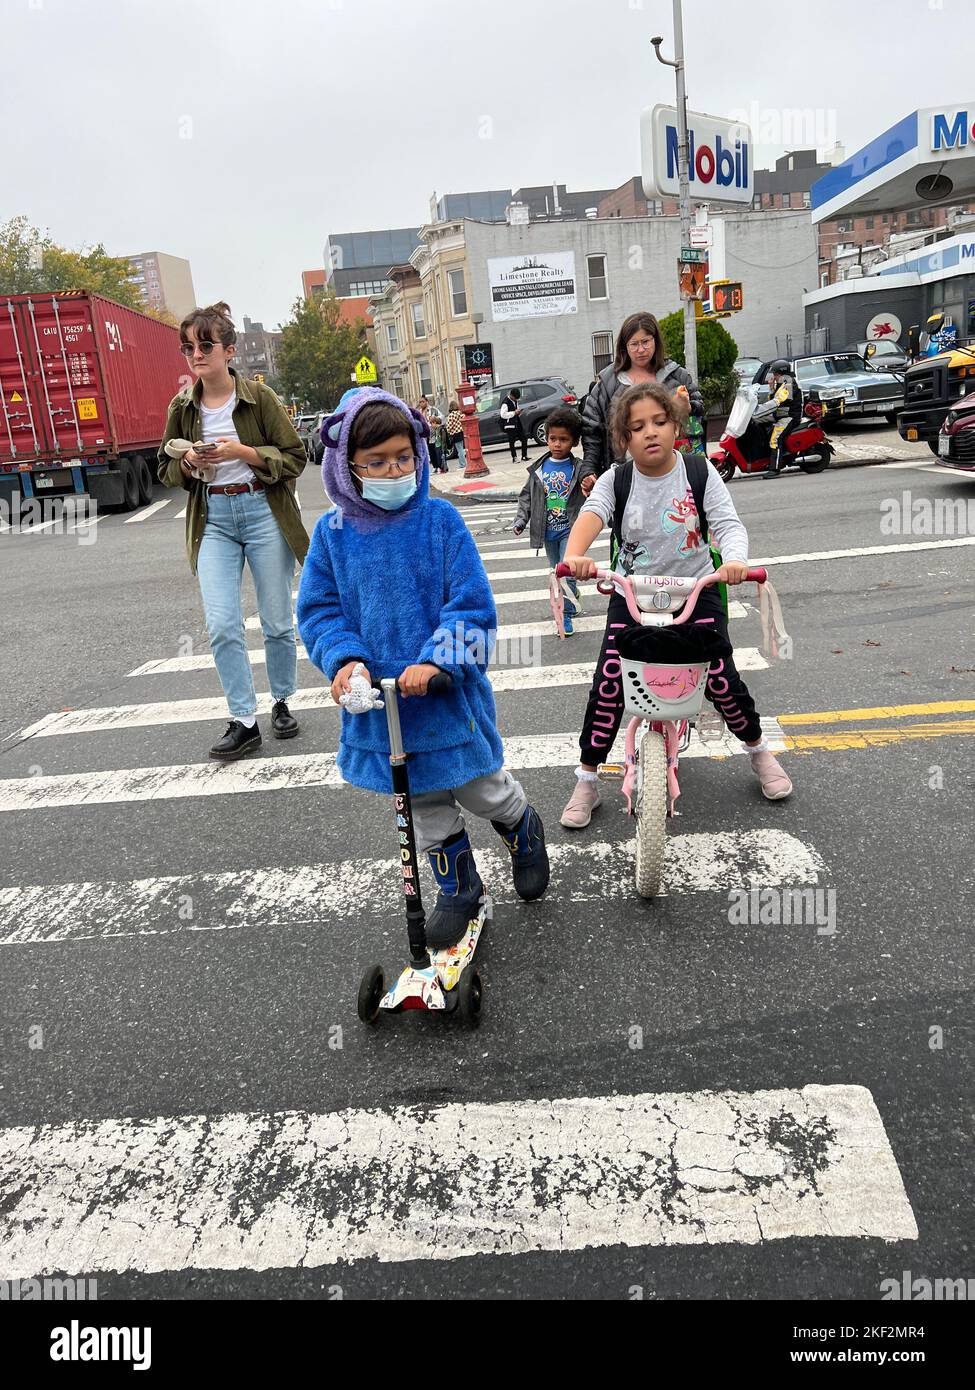 Kids ride self propelled vehicles as they cross the street on their way home after school on Church Avenue in Brooklyn, New York. Stock Photo